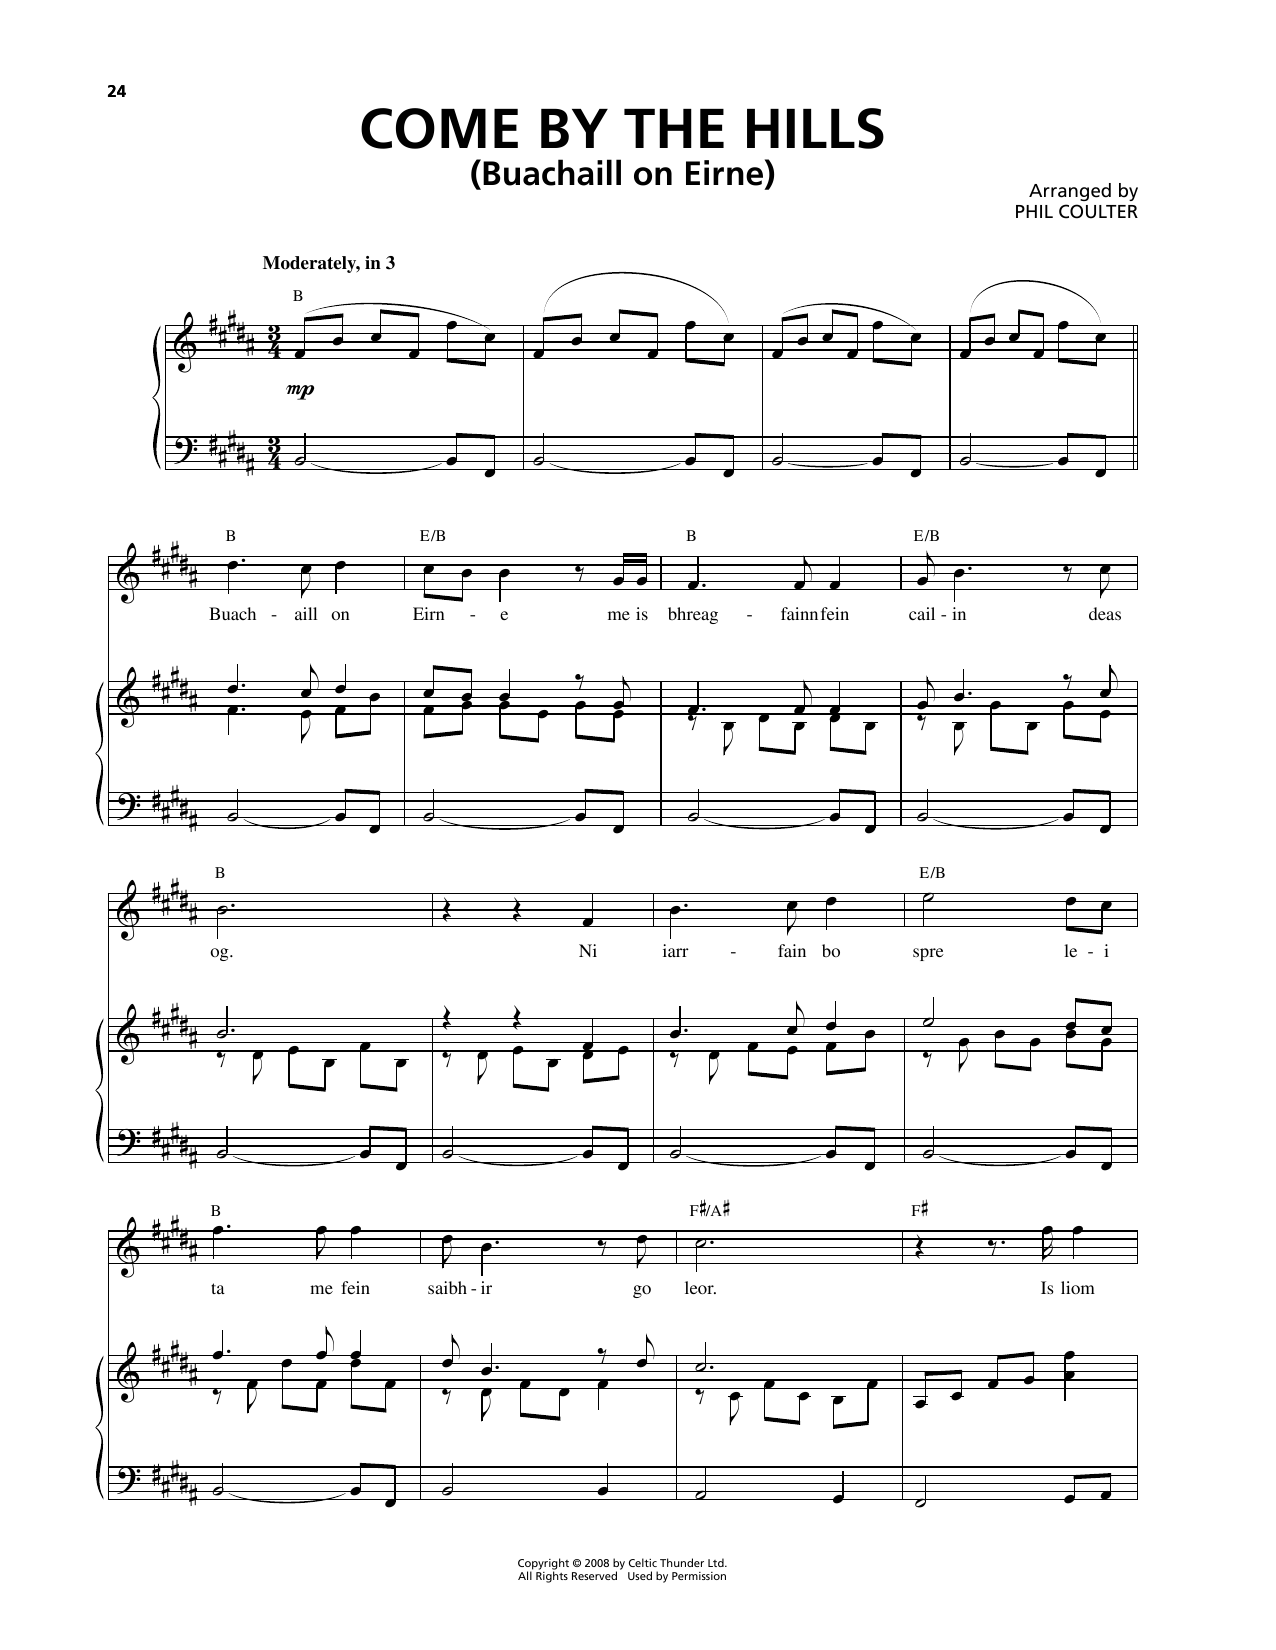 Download Celtic Thunder Come By The Hills (Buachaill On Eirne) Sheet Music